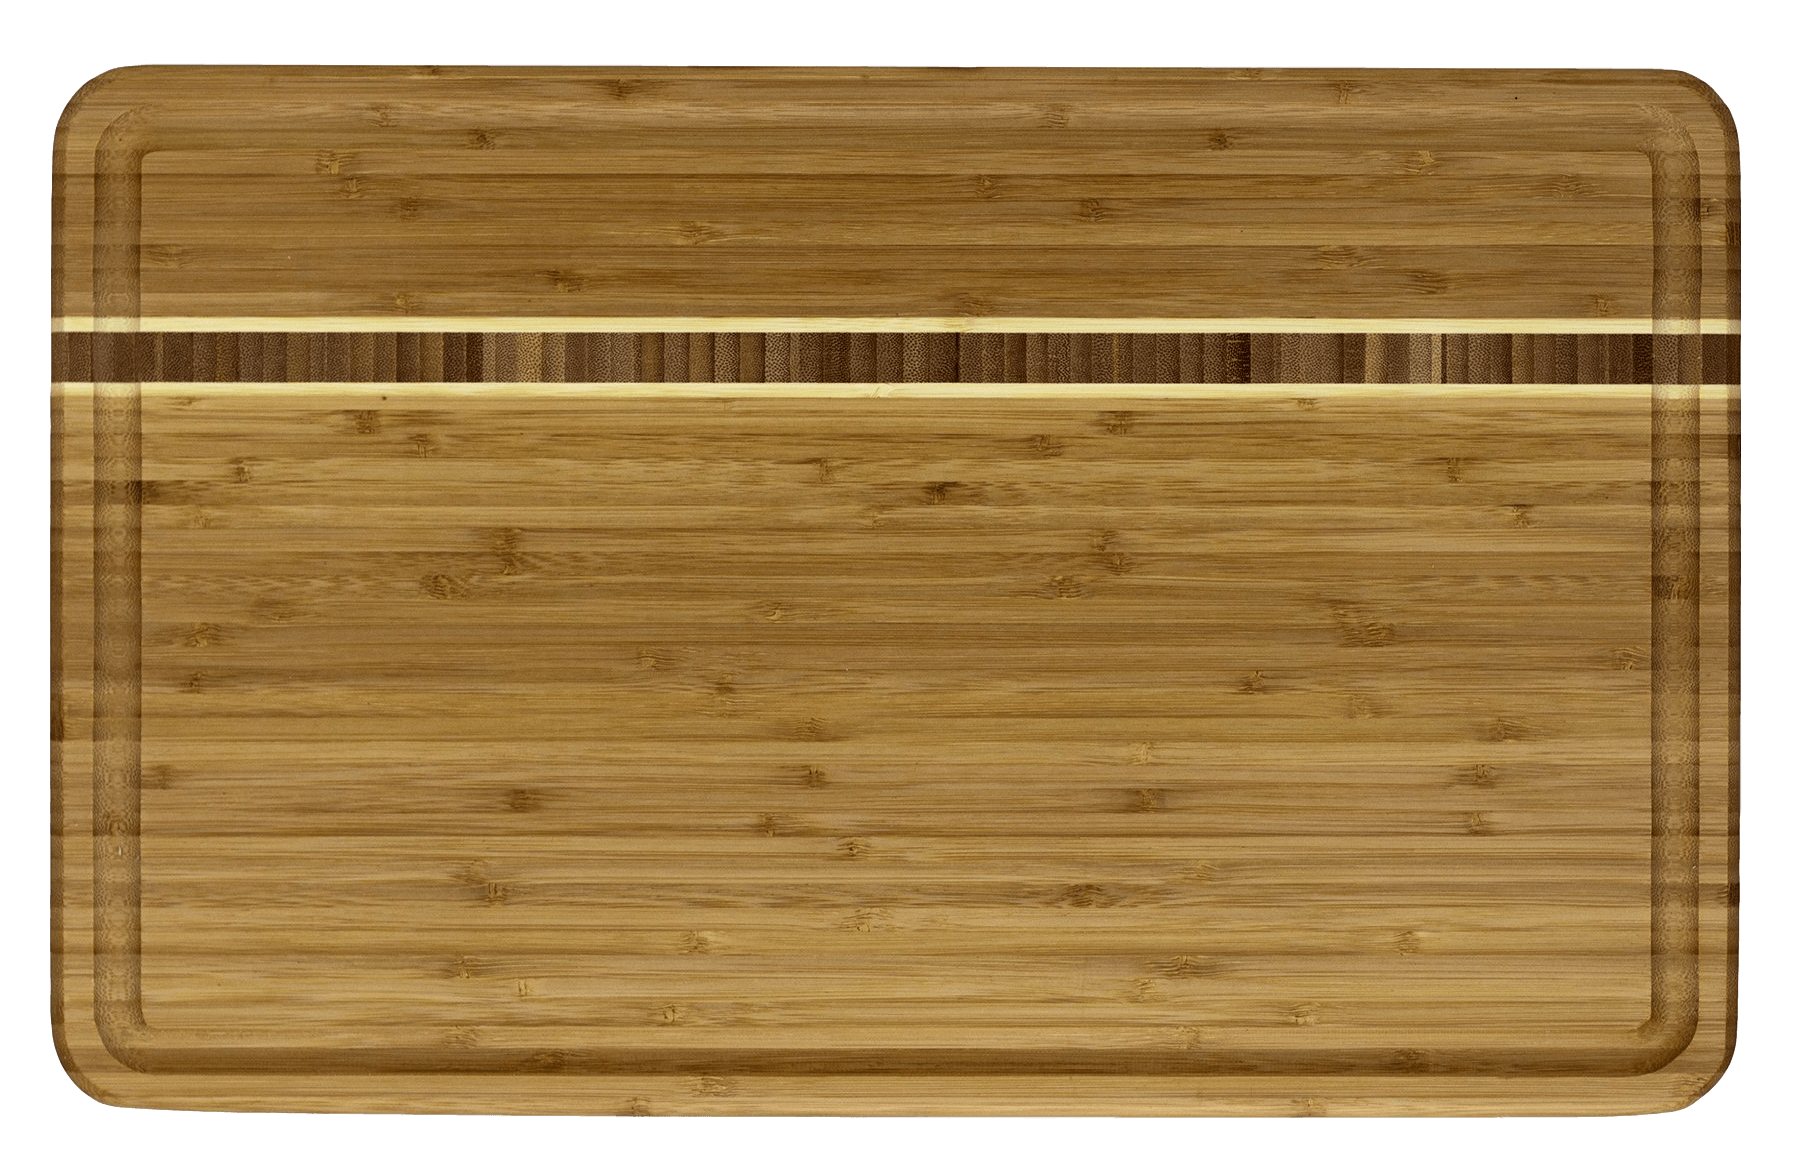 Dominica Serving and Cutting Board - Bamboo